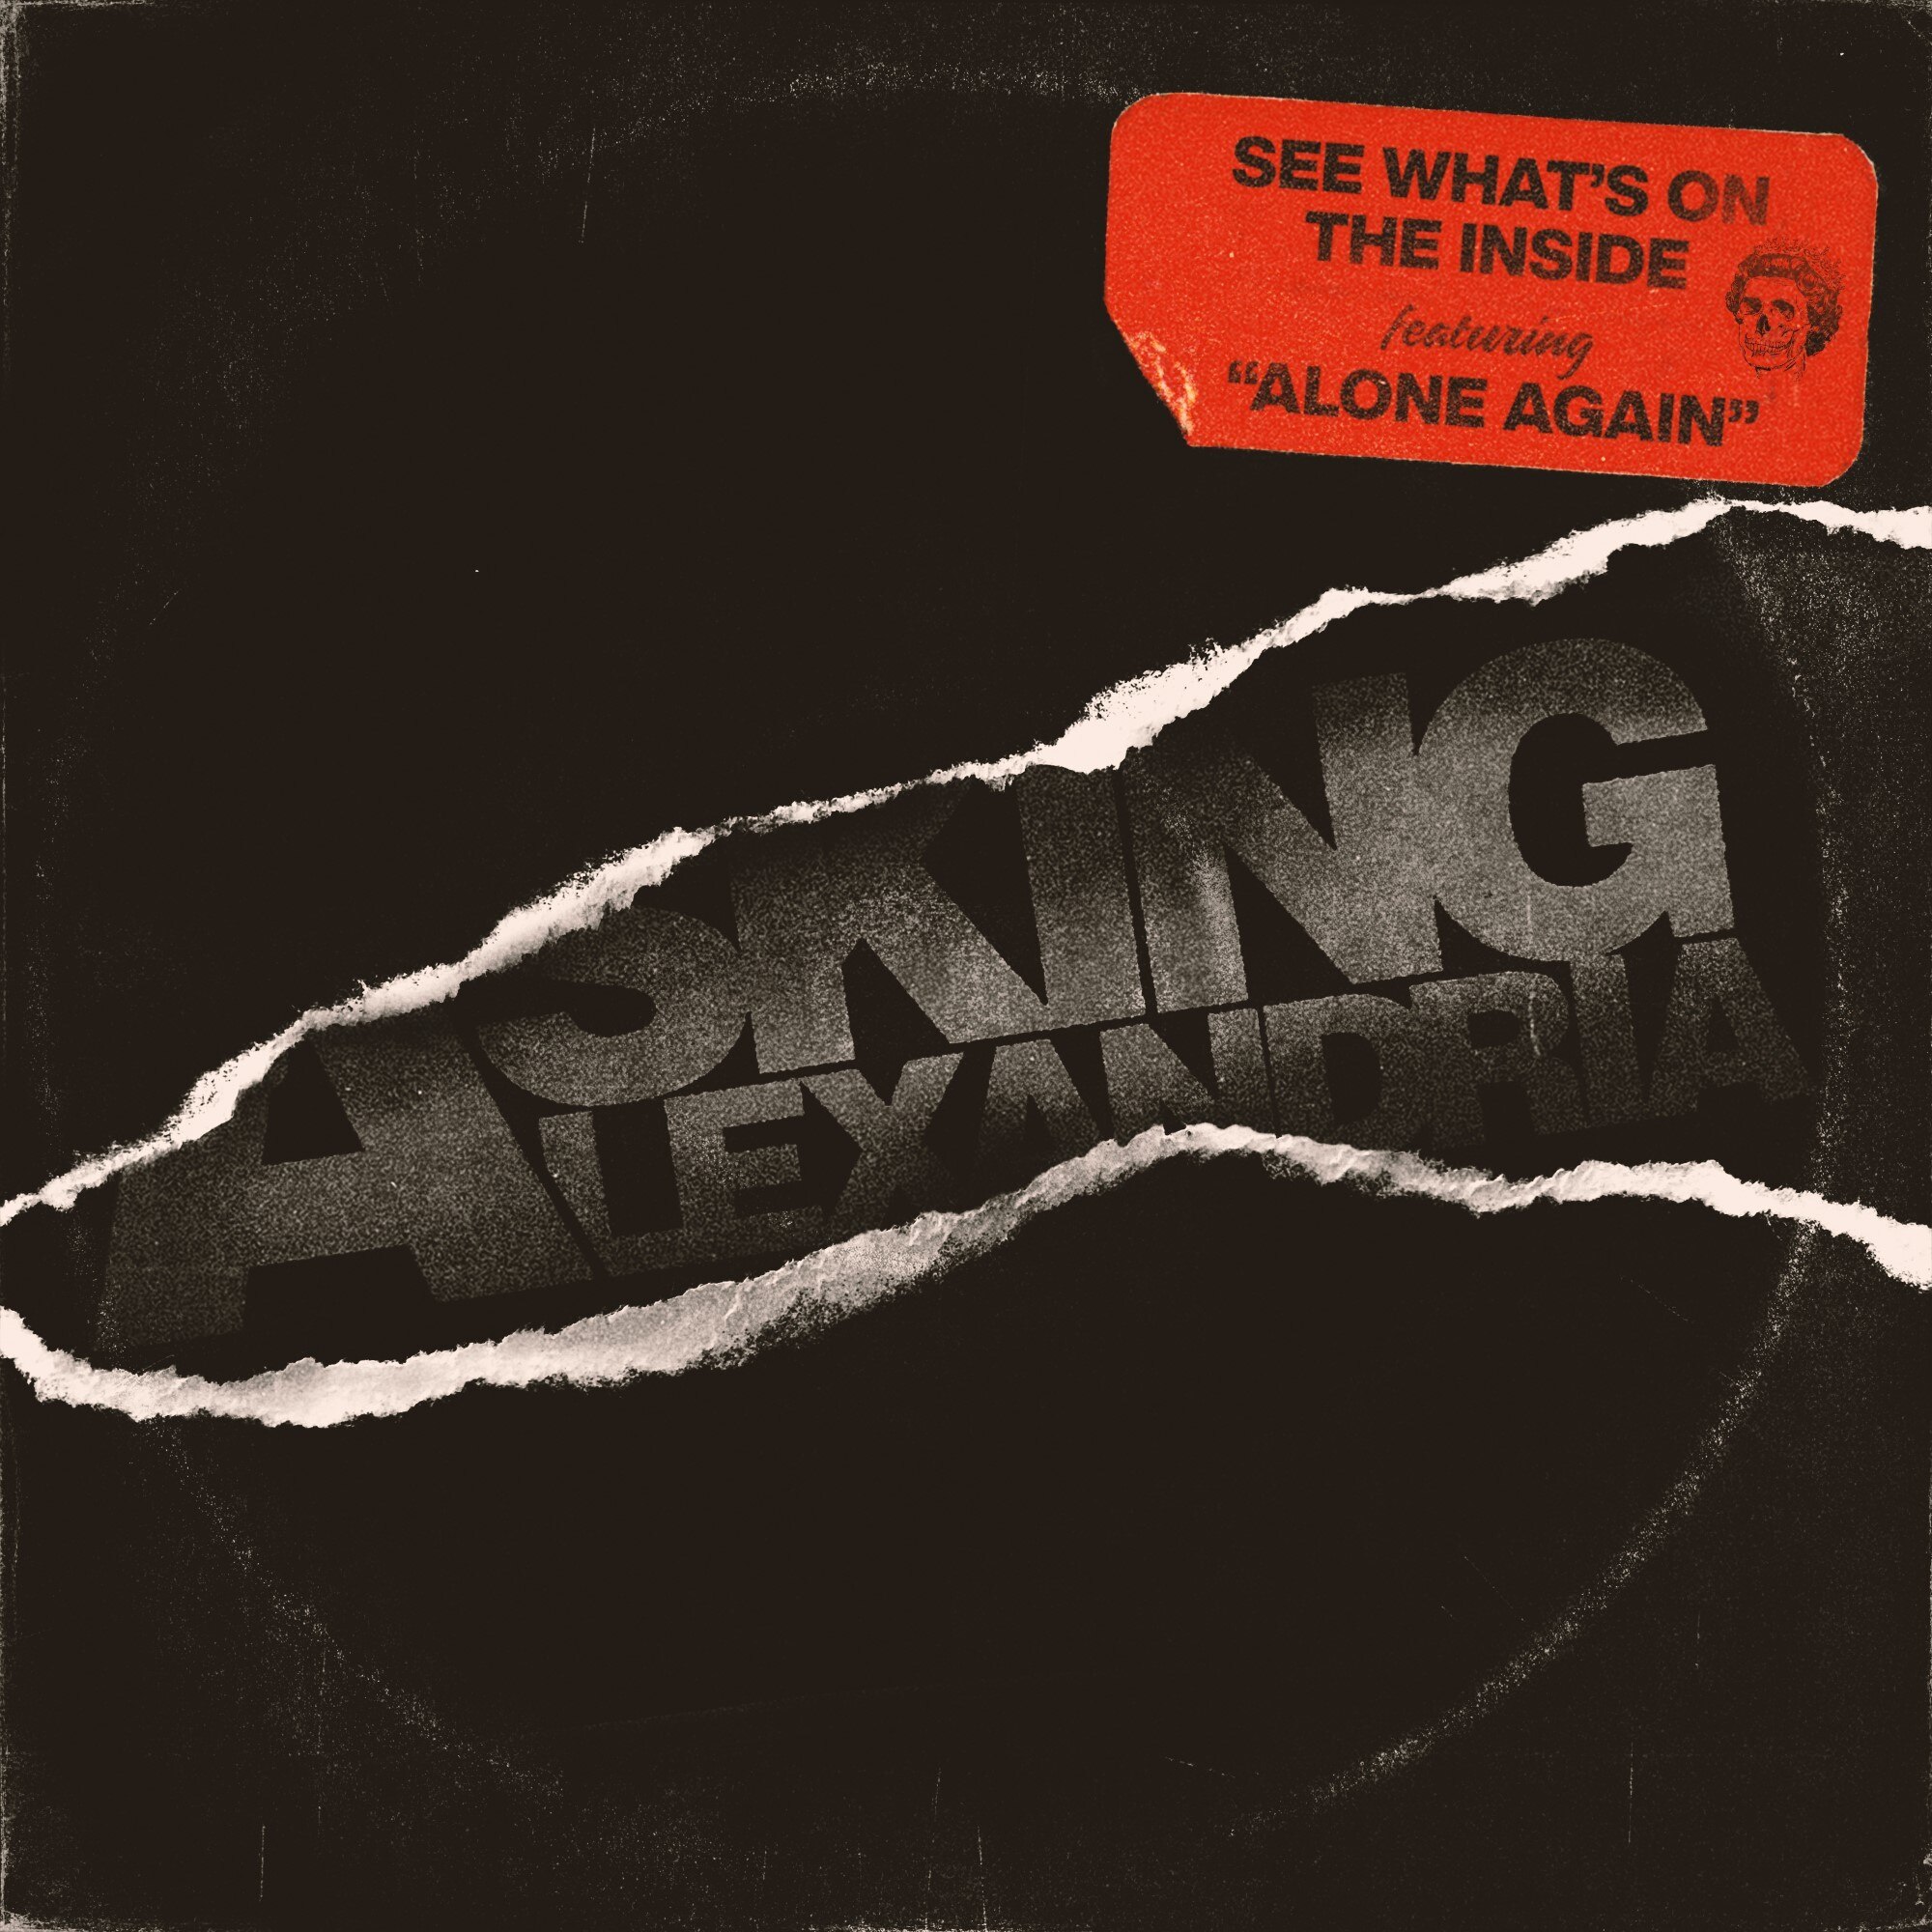 SEE WHAT'S ON THE INSIDE -- ASKING ALEXANDRIA